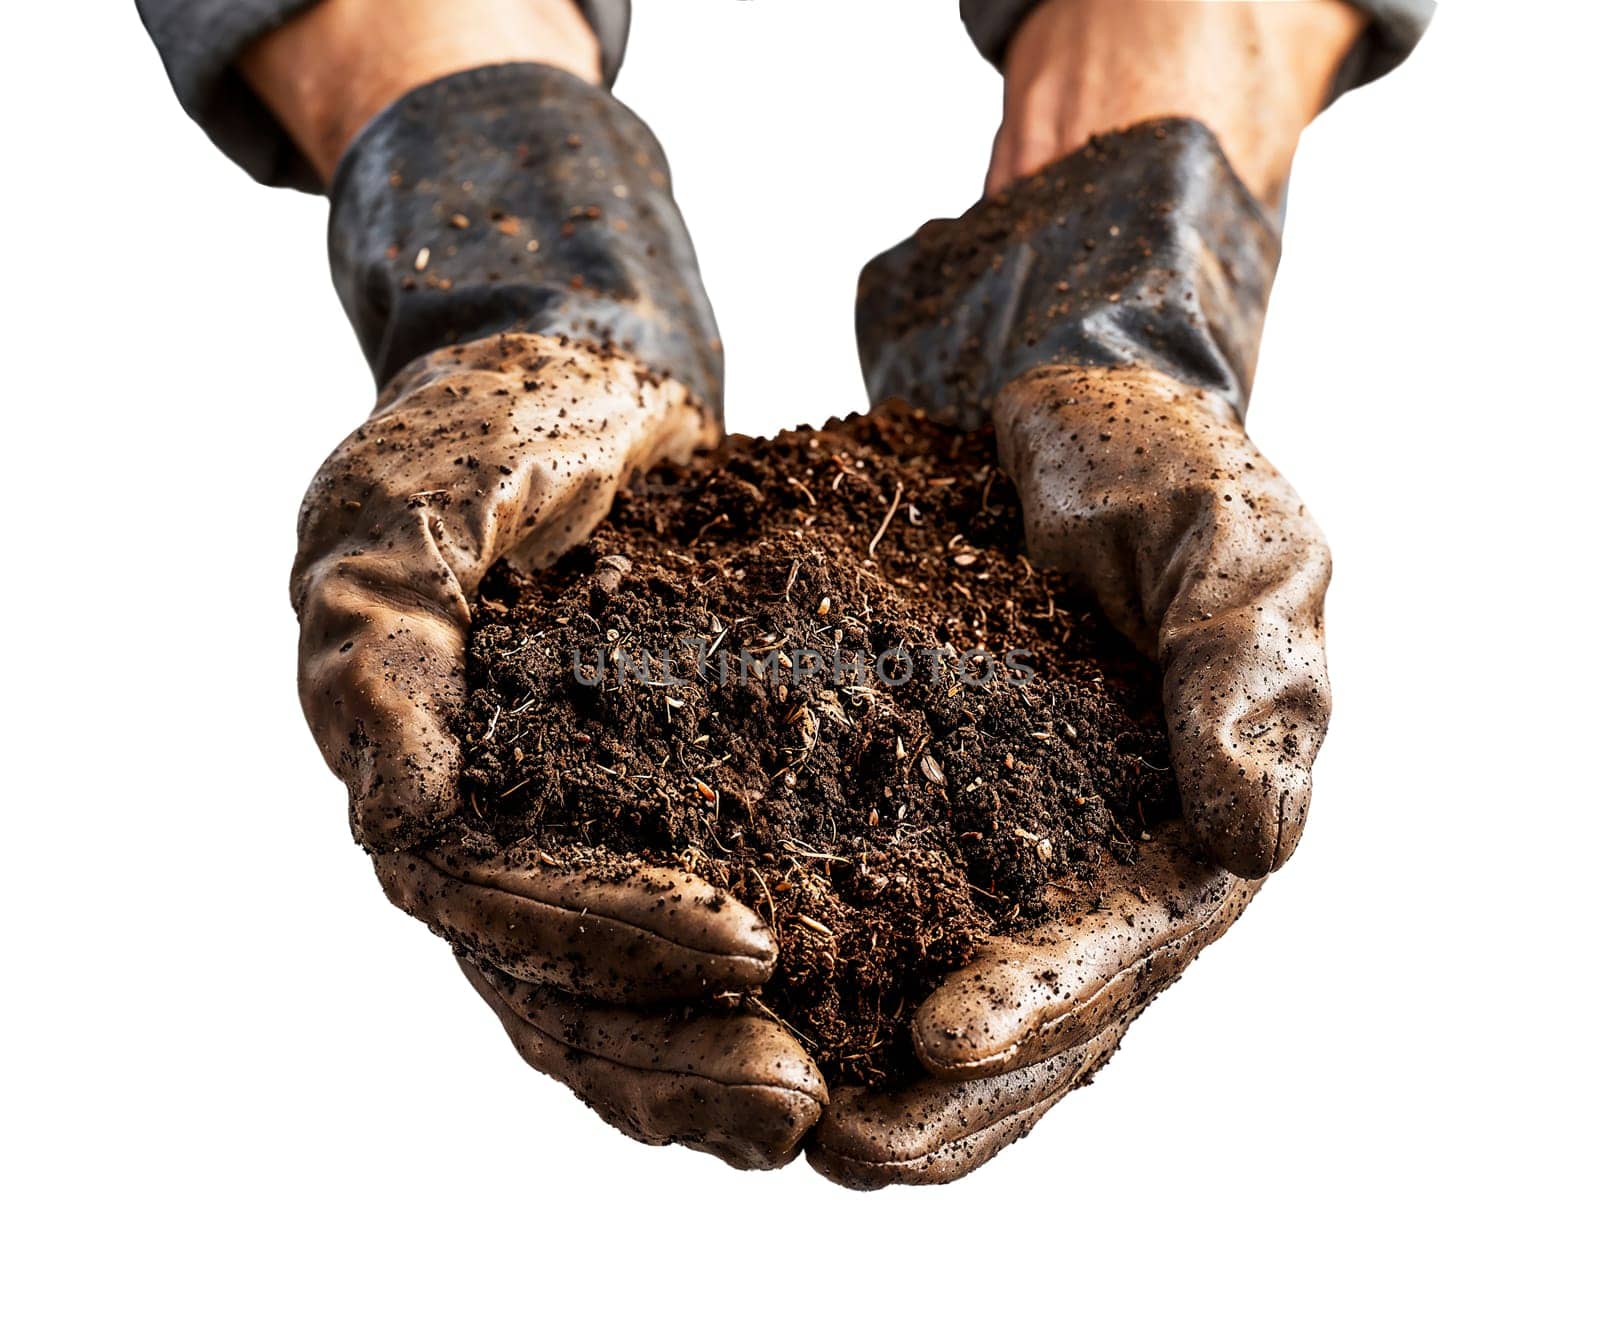 Close-up of a farmers hands holding soil mixed with homemade compost.